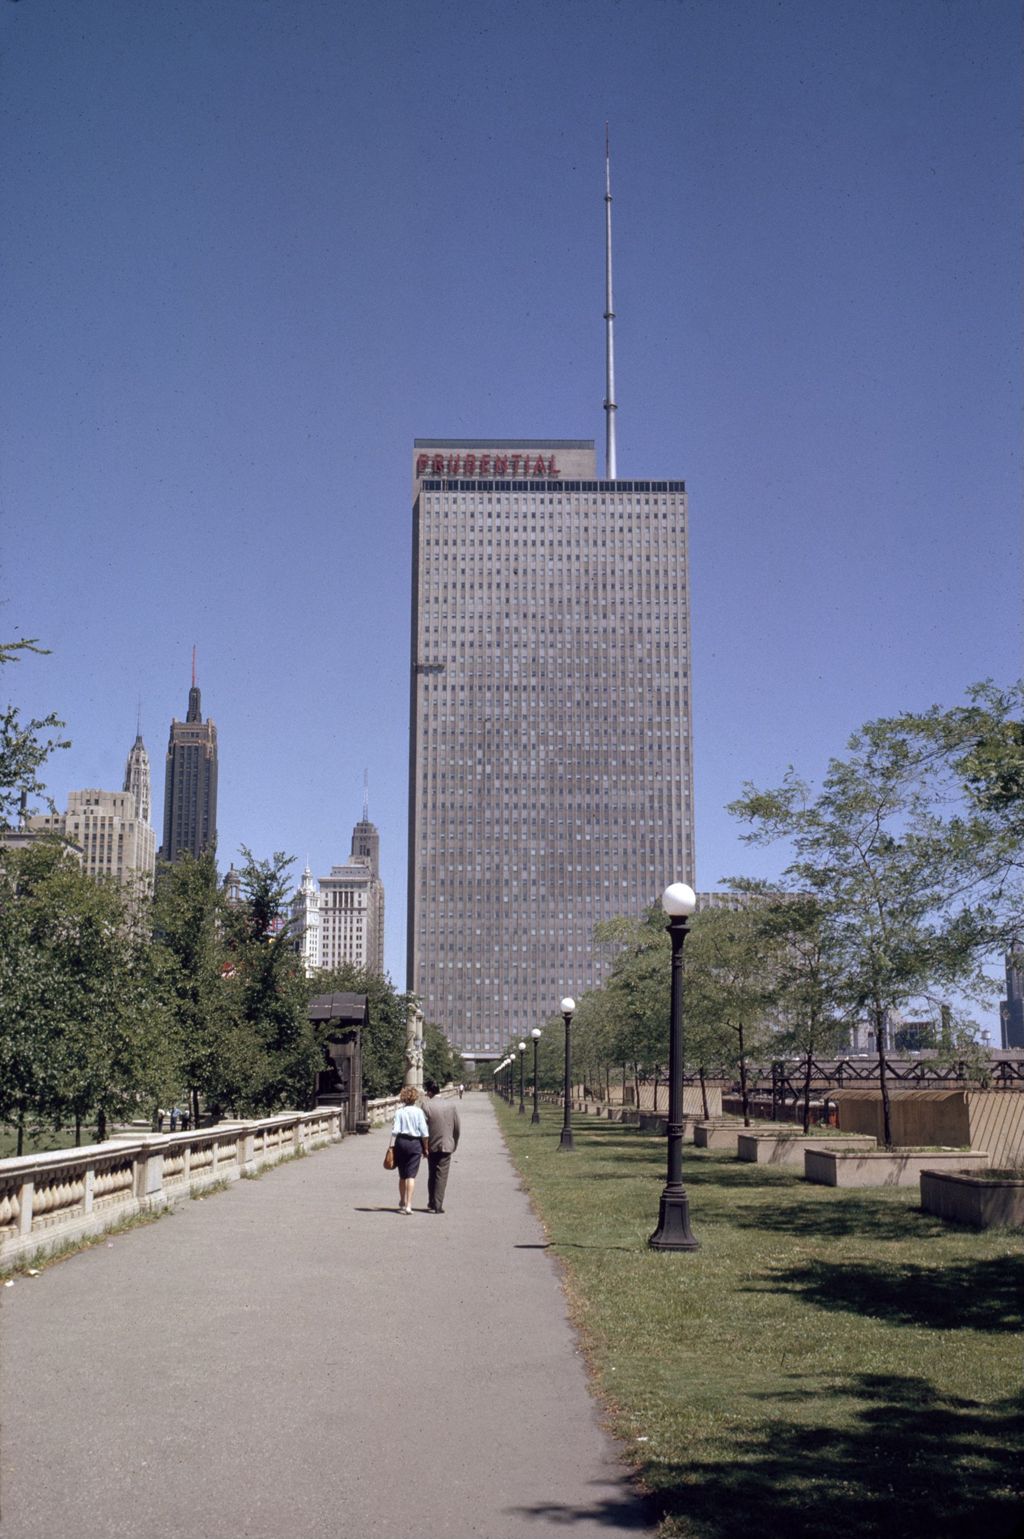 Prudential Building from Grant Park